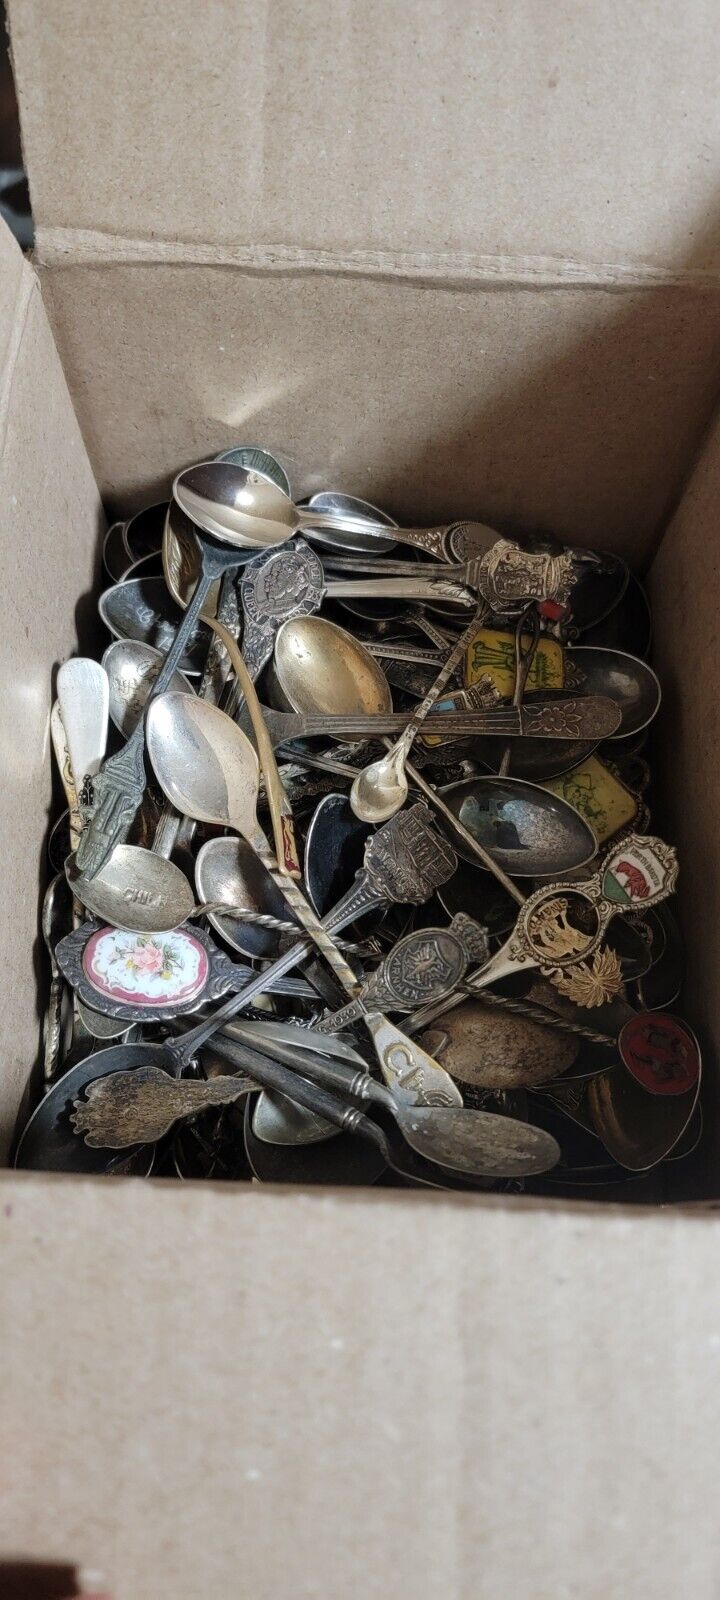 Souvenir Spoons Large Lot 4+Lbs  Silver plated, Stainless, Presidential, Vintage